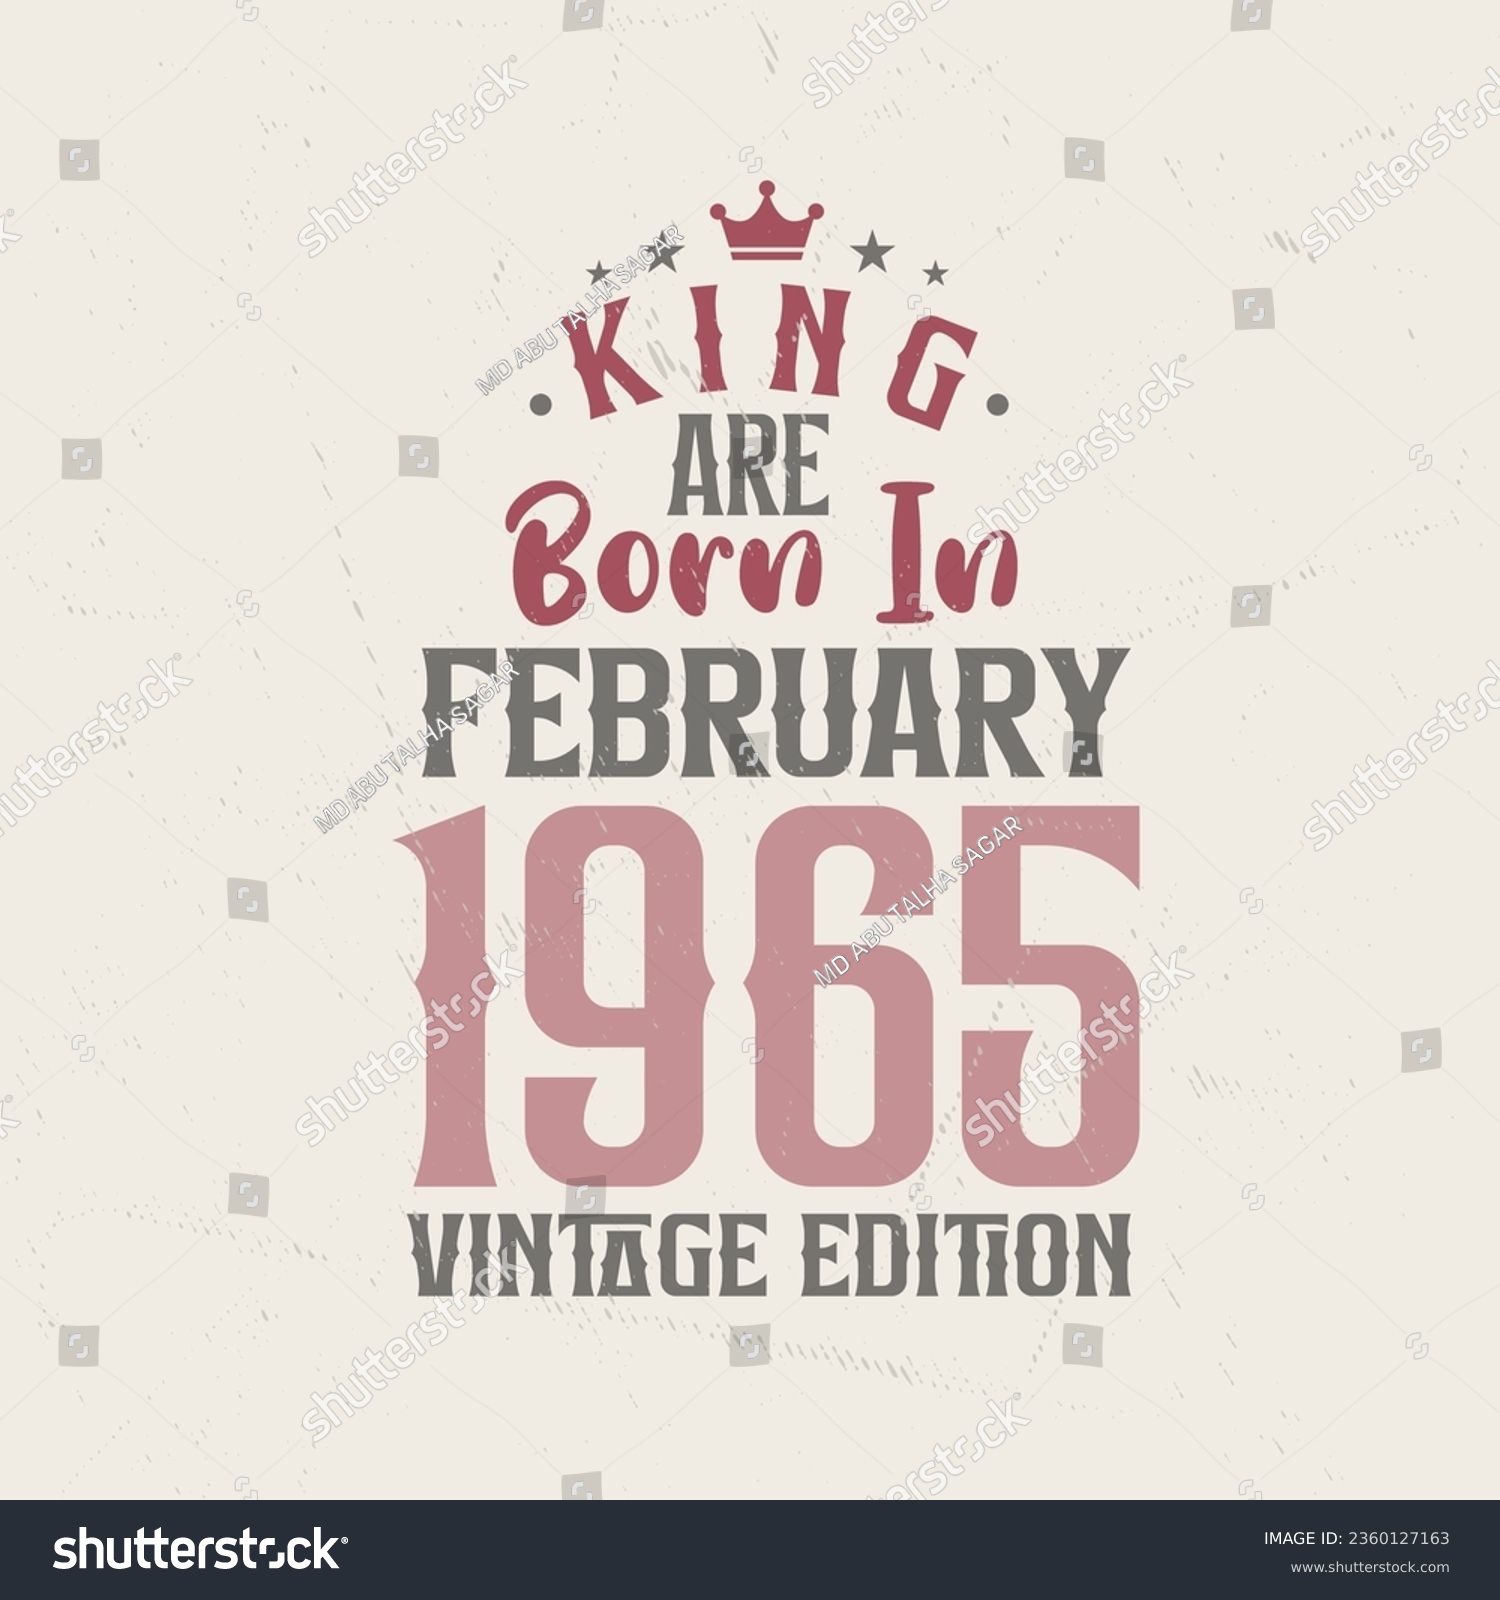 SVG of King are born in February 1965 Vintage edition. King are born in February 1965 Retro Vintage Birthday Vintage edition svg